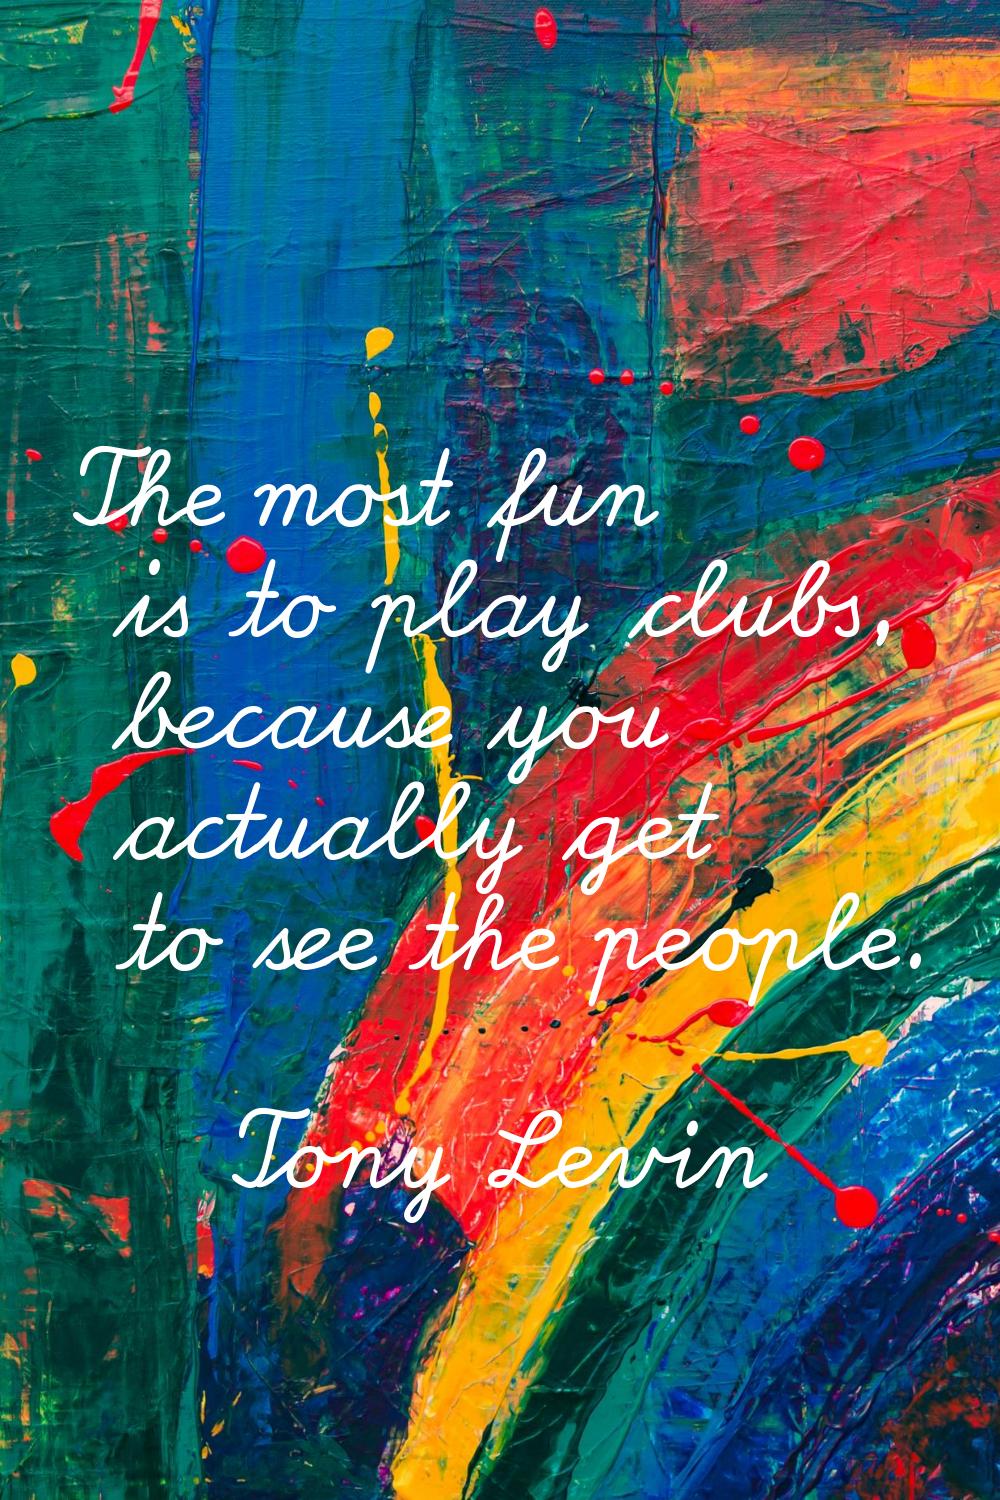 The most fun is to play clubs, because you actually get to see the people.